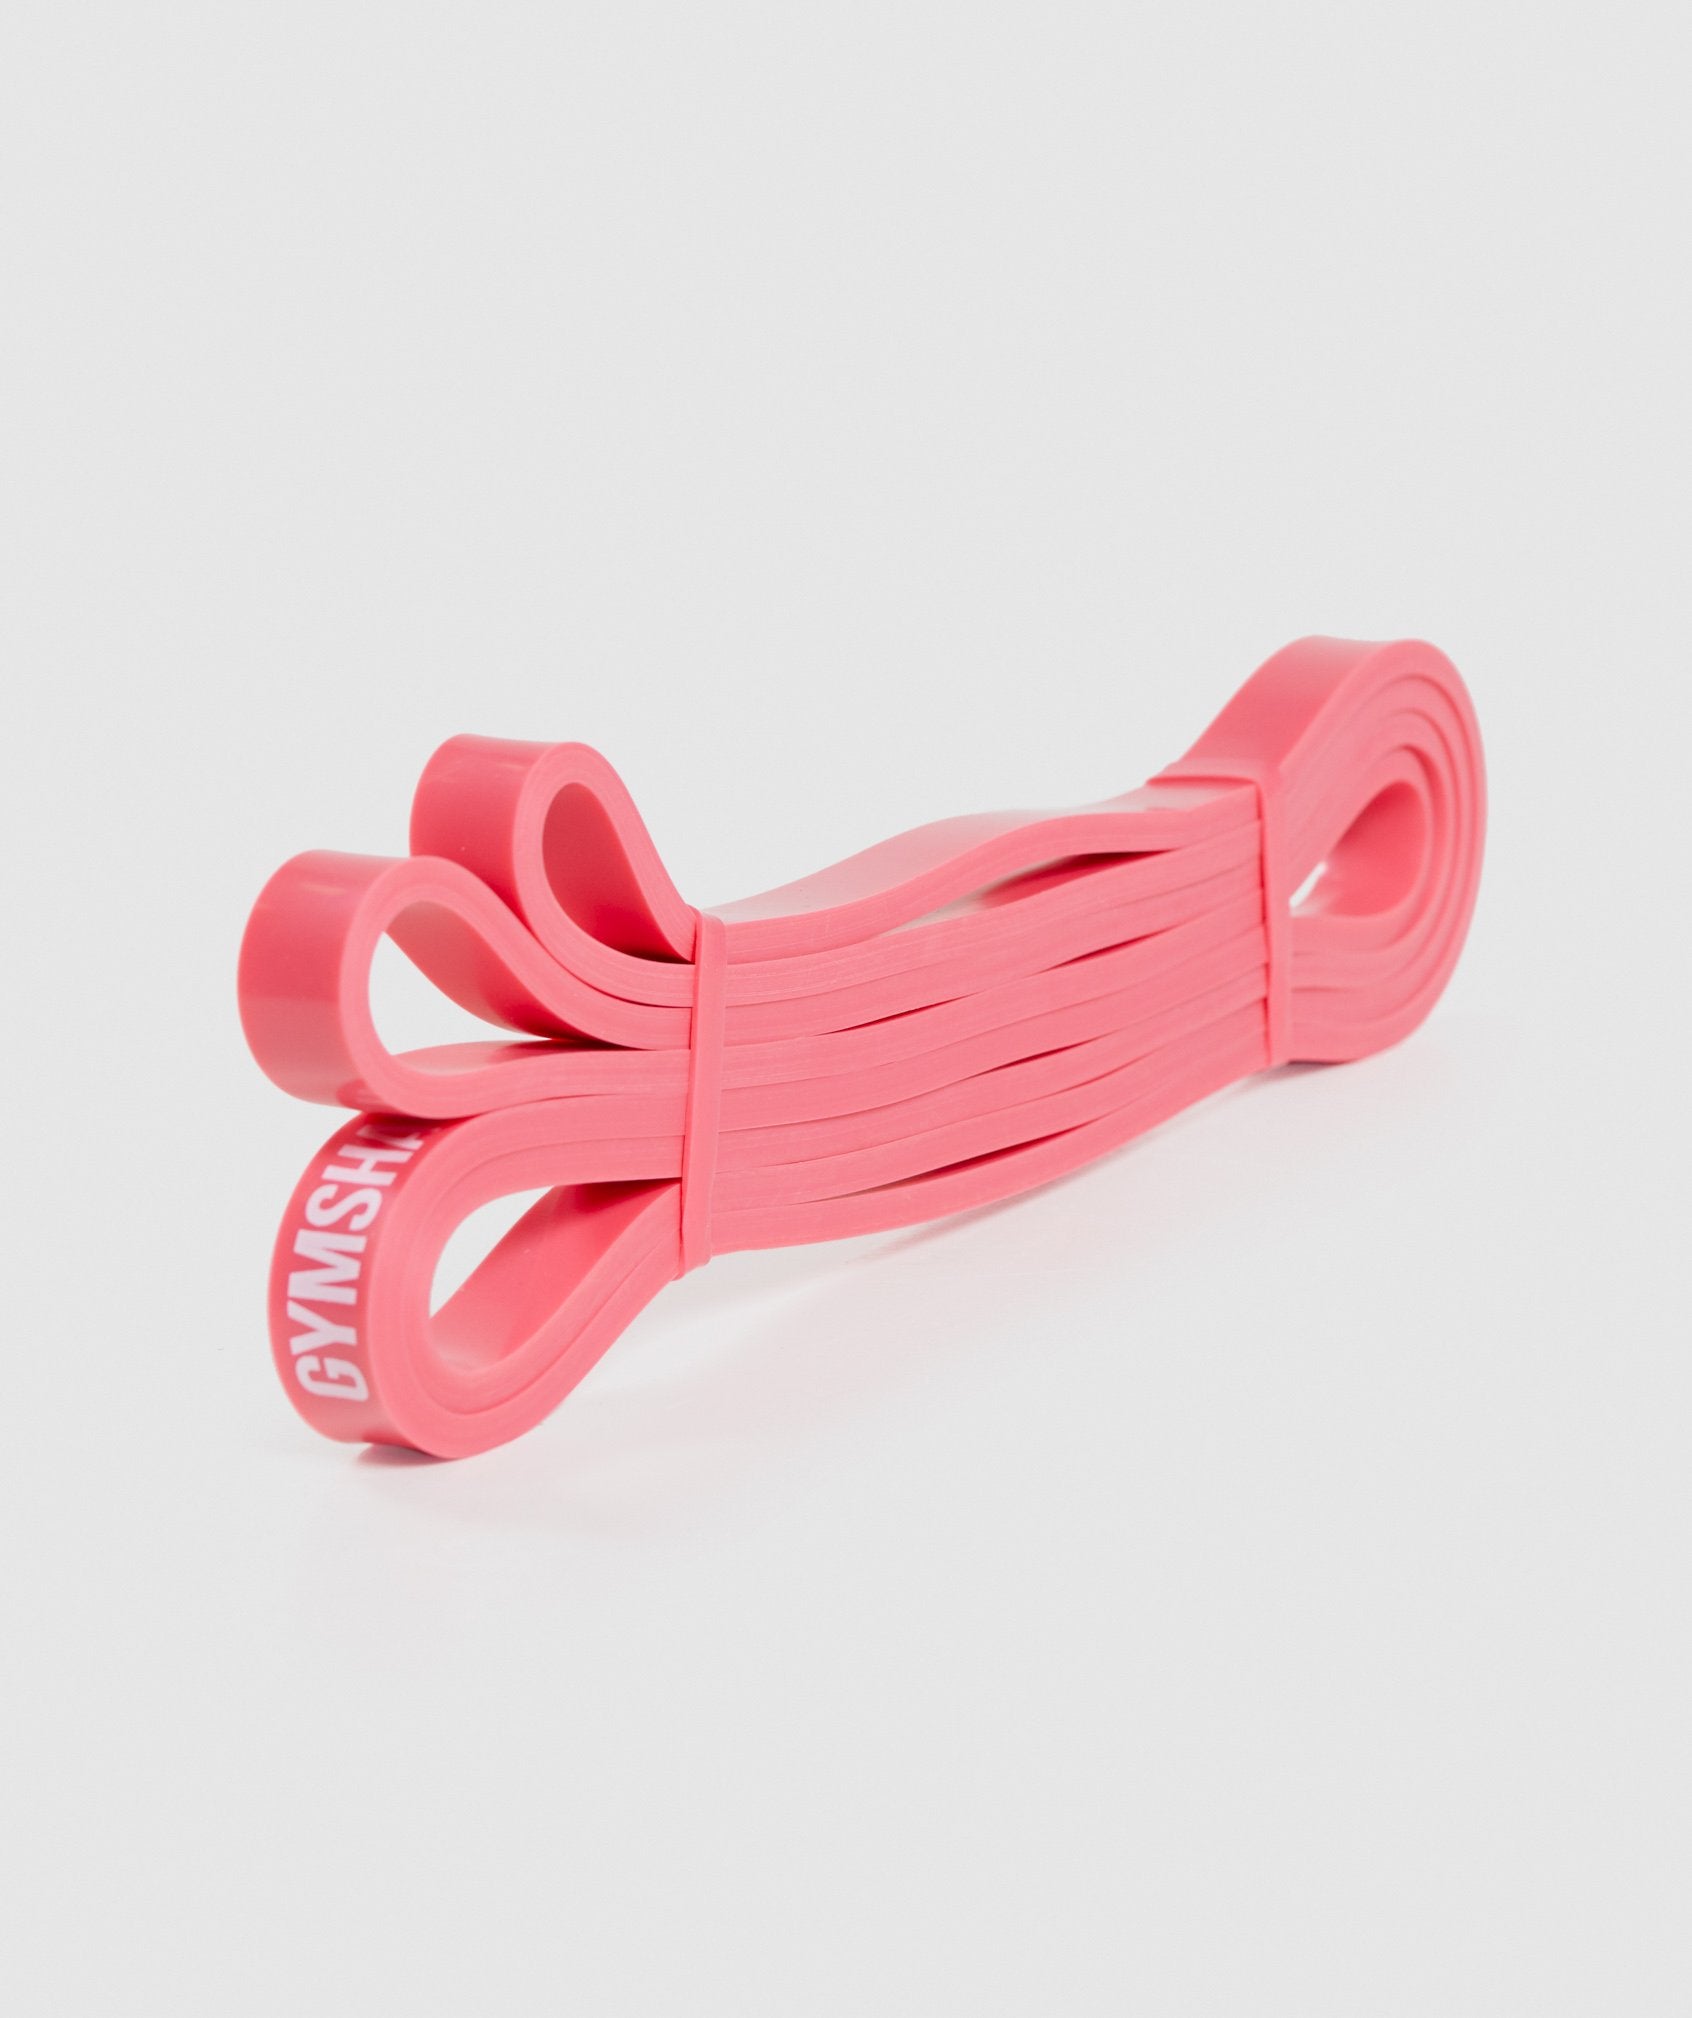 2KG to 16KG Resistance Band in Pink